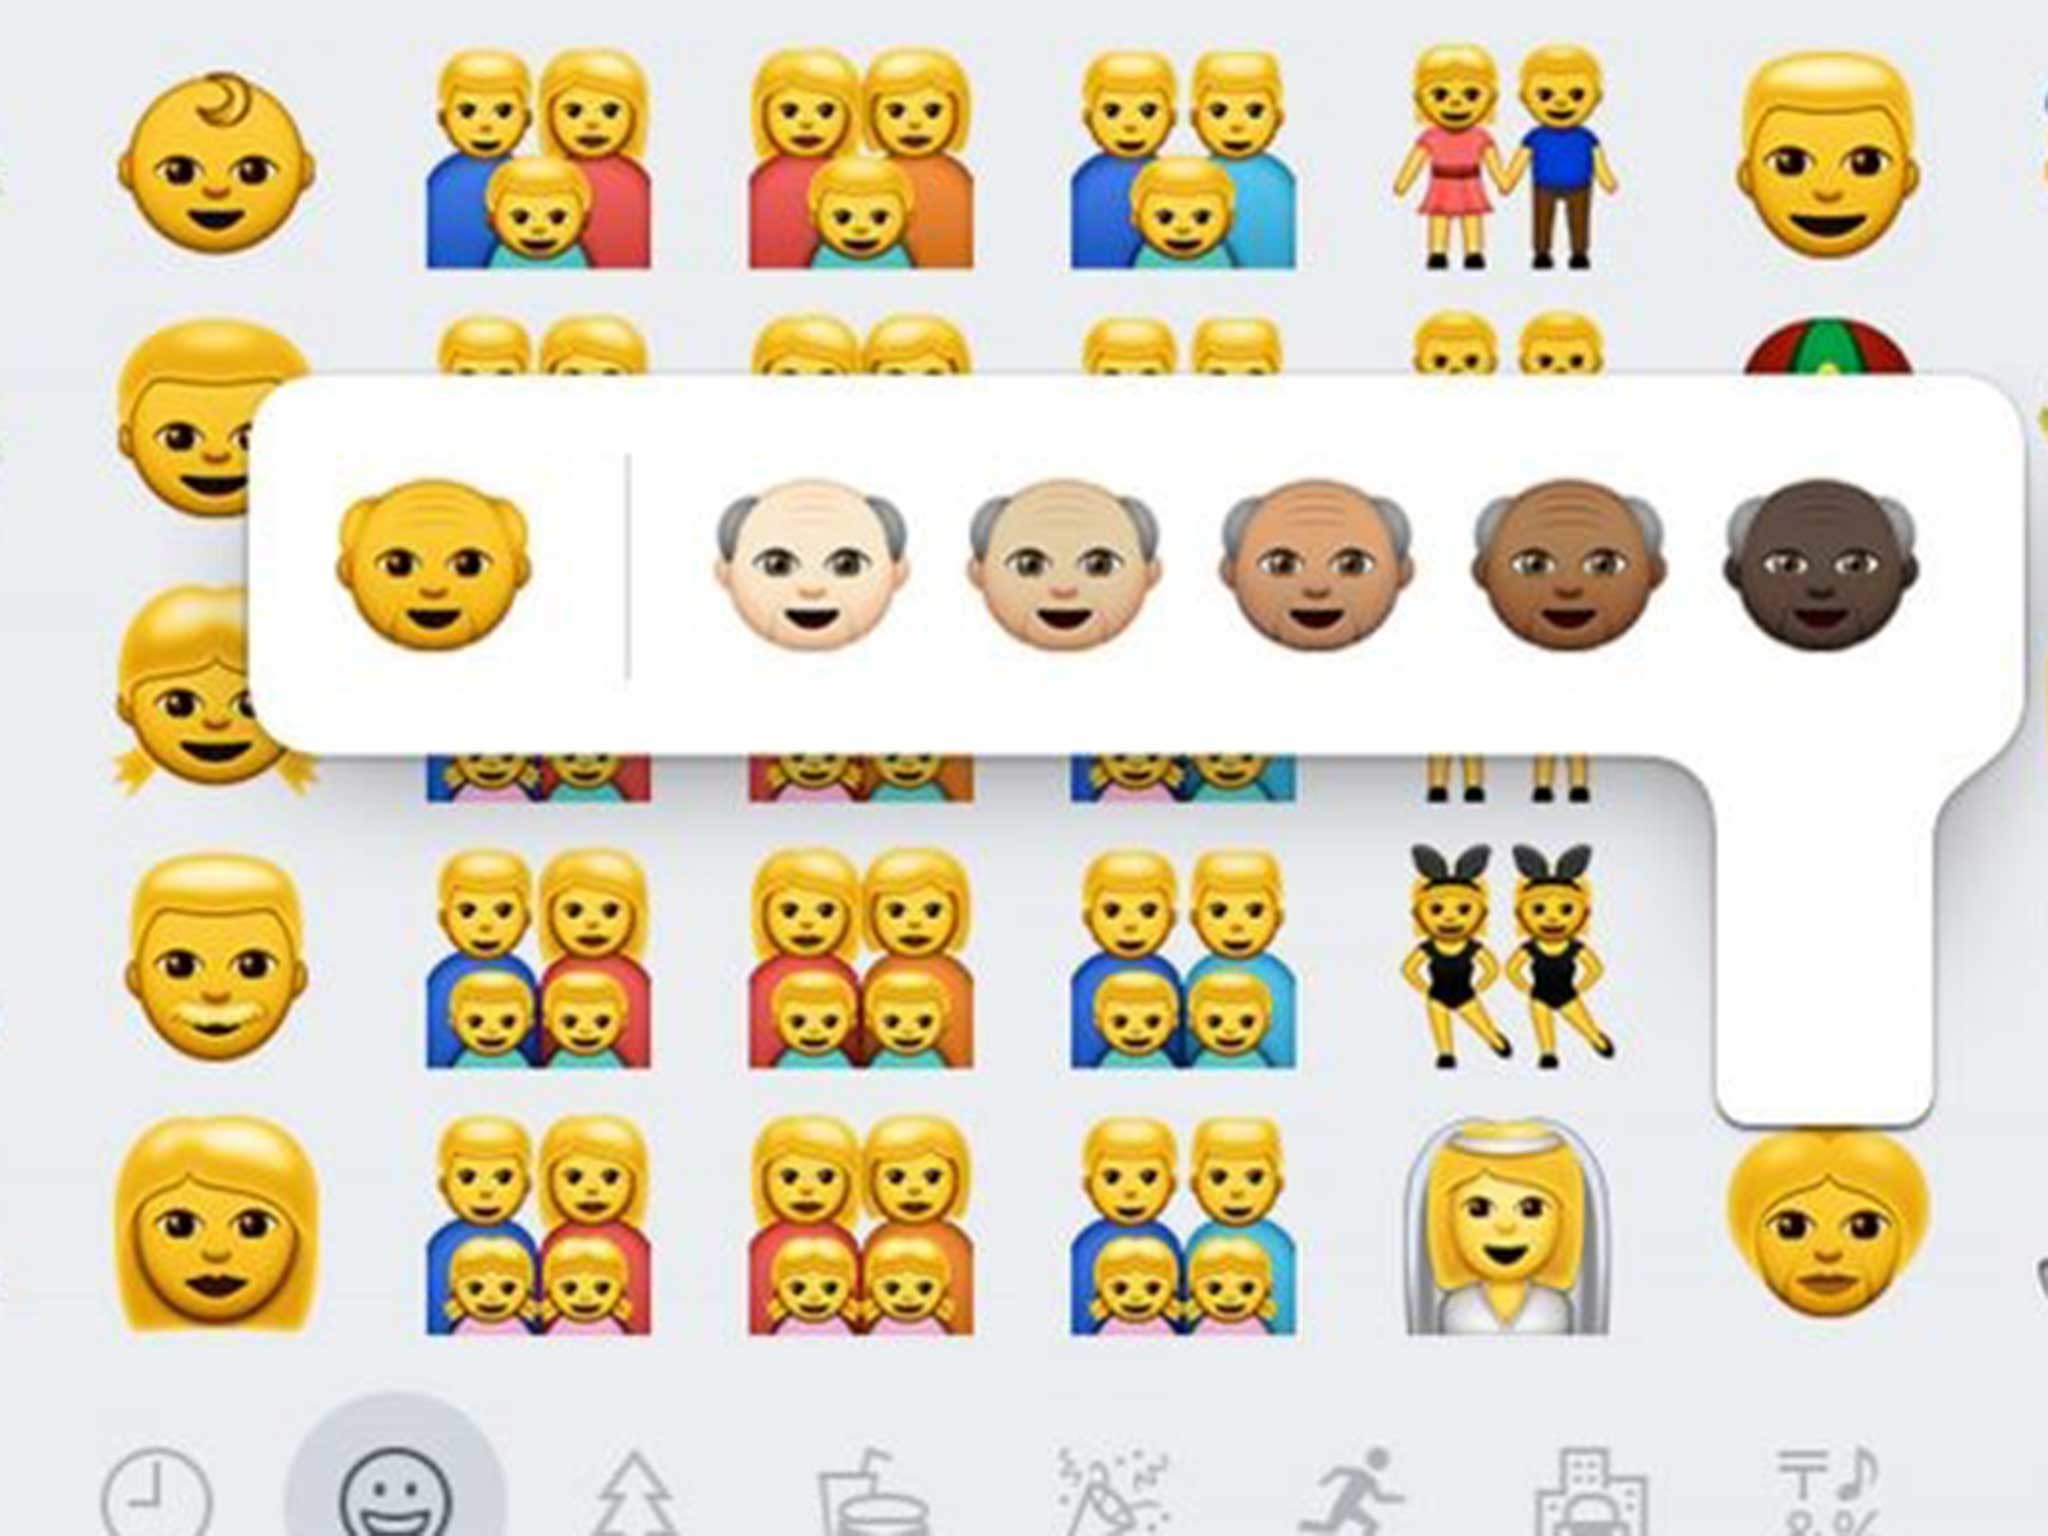 2048x1536 Apple's ethnic emojis are being used to make racist comments on social  media | The Independent